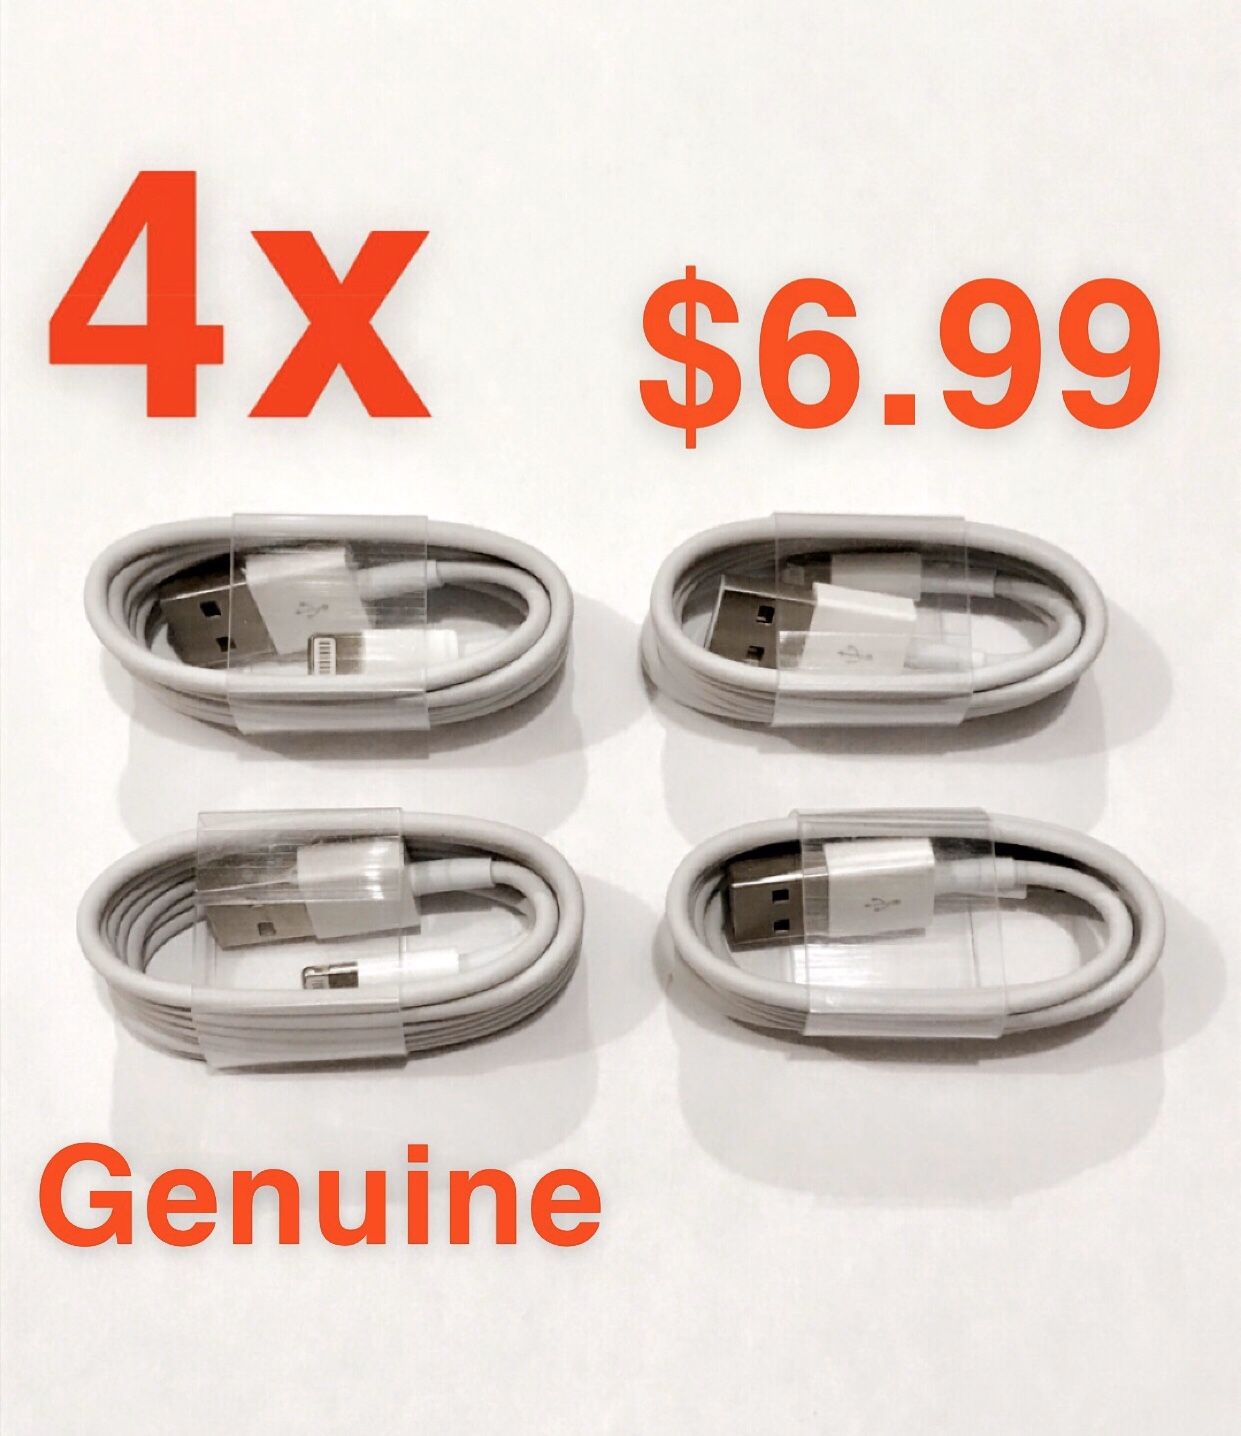 4x Apple IPhone Charger / Charging Cable Genuine